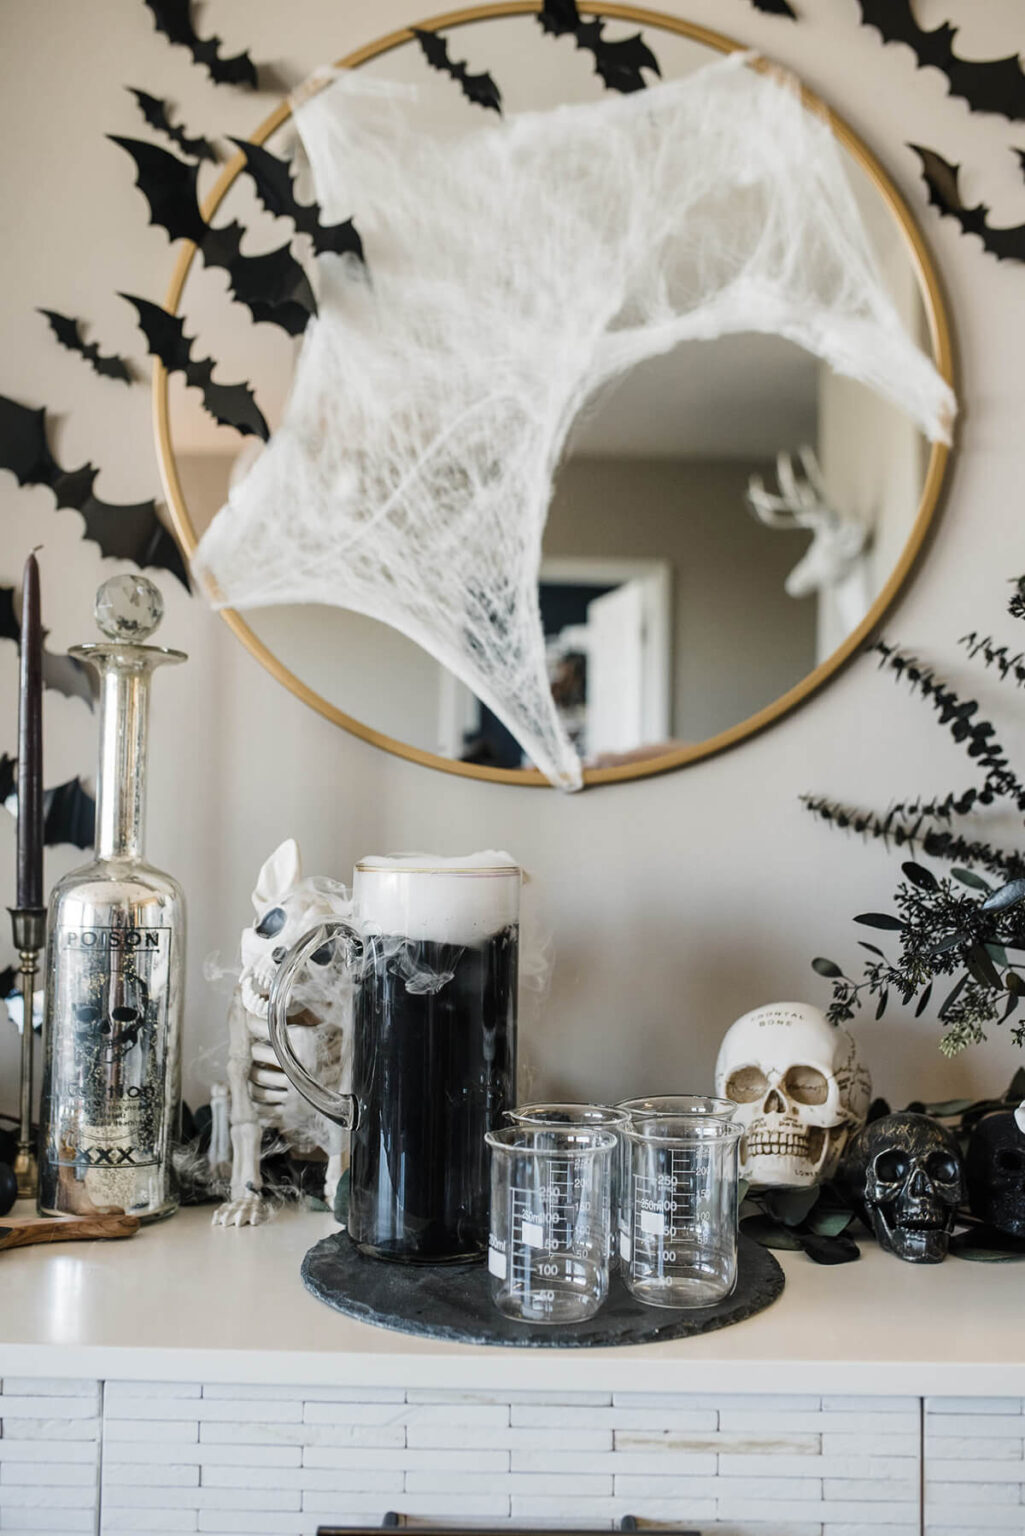 Get Ready for Halloween with These Decorations